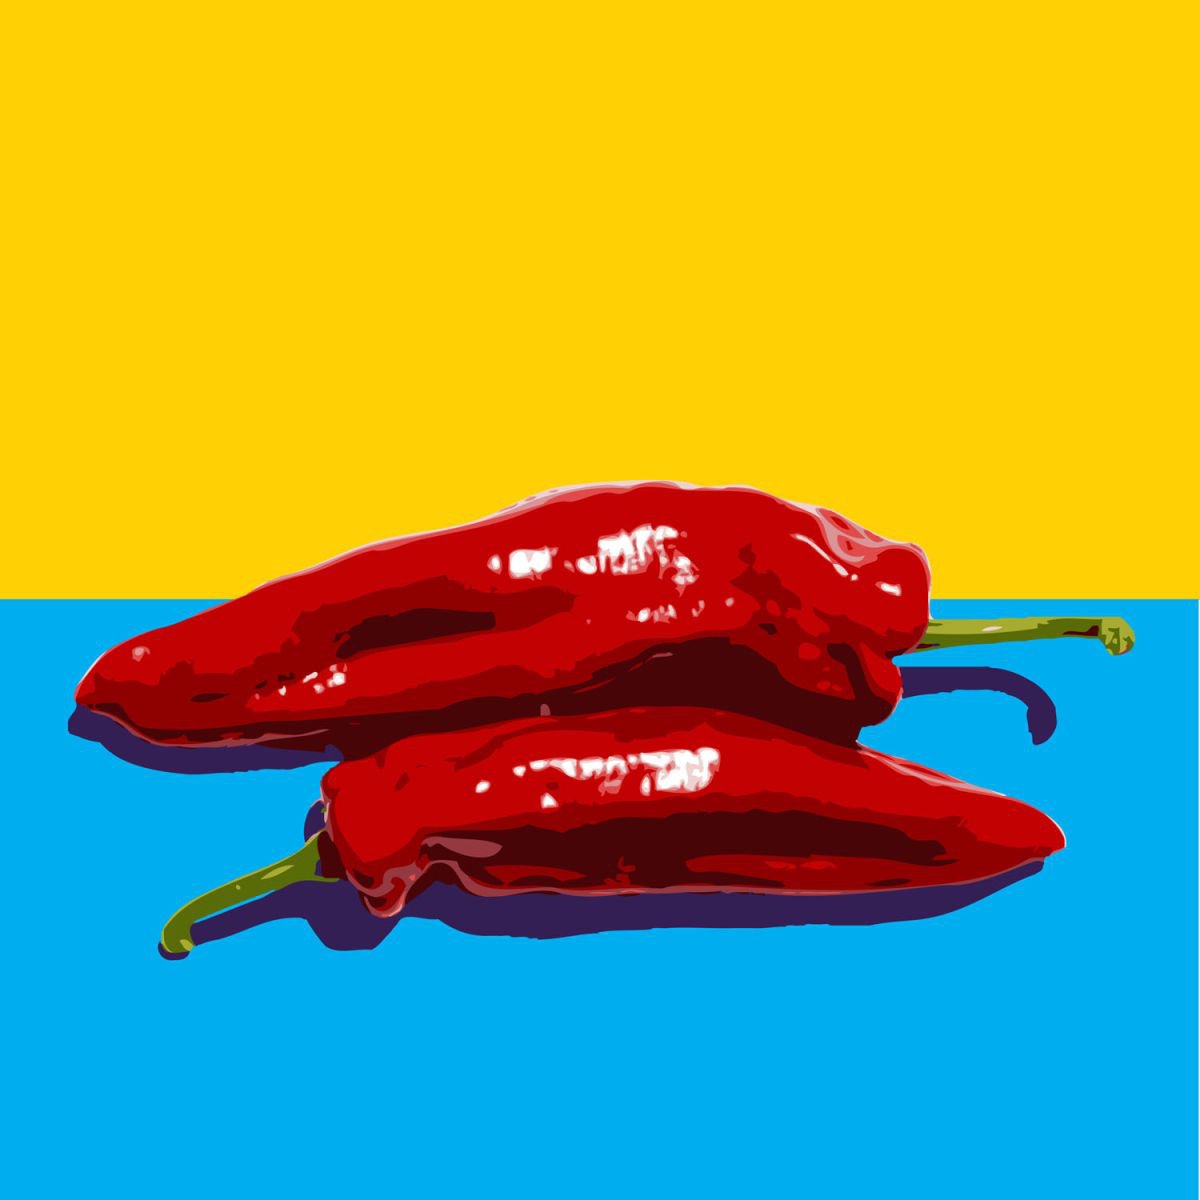 POINTED RED PEPPERS#2 by Keith Dodd